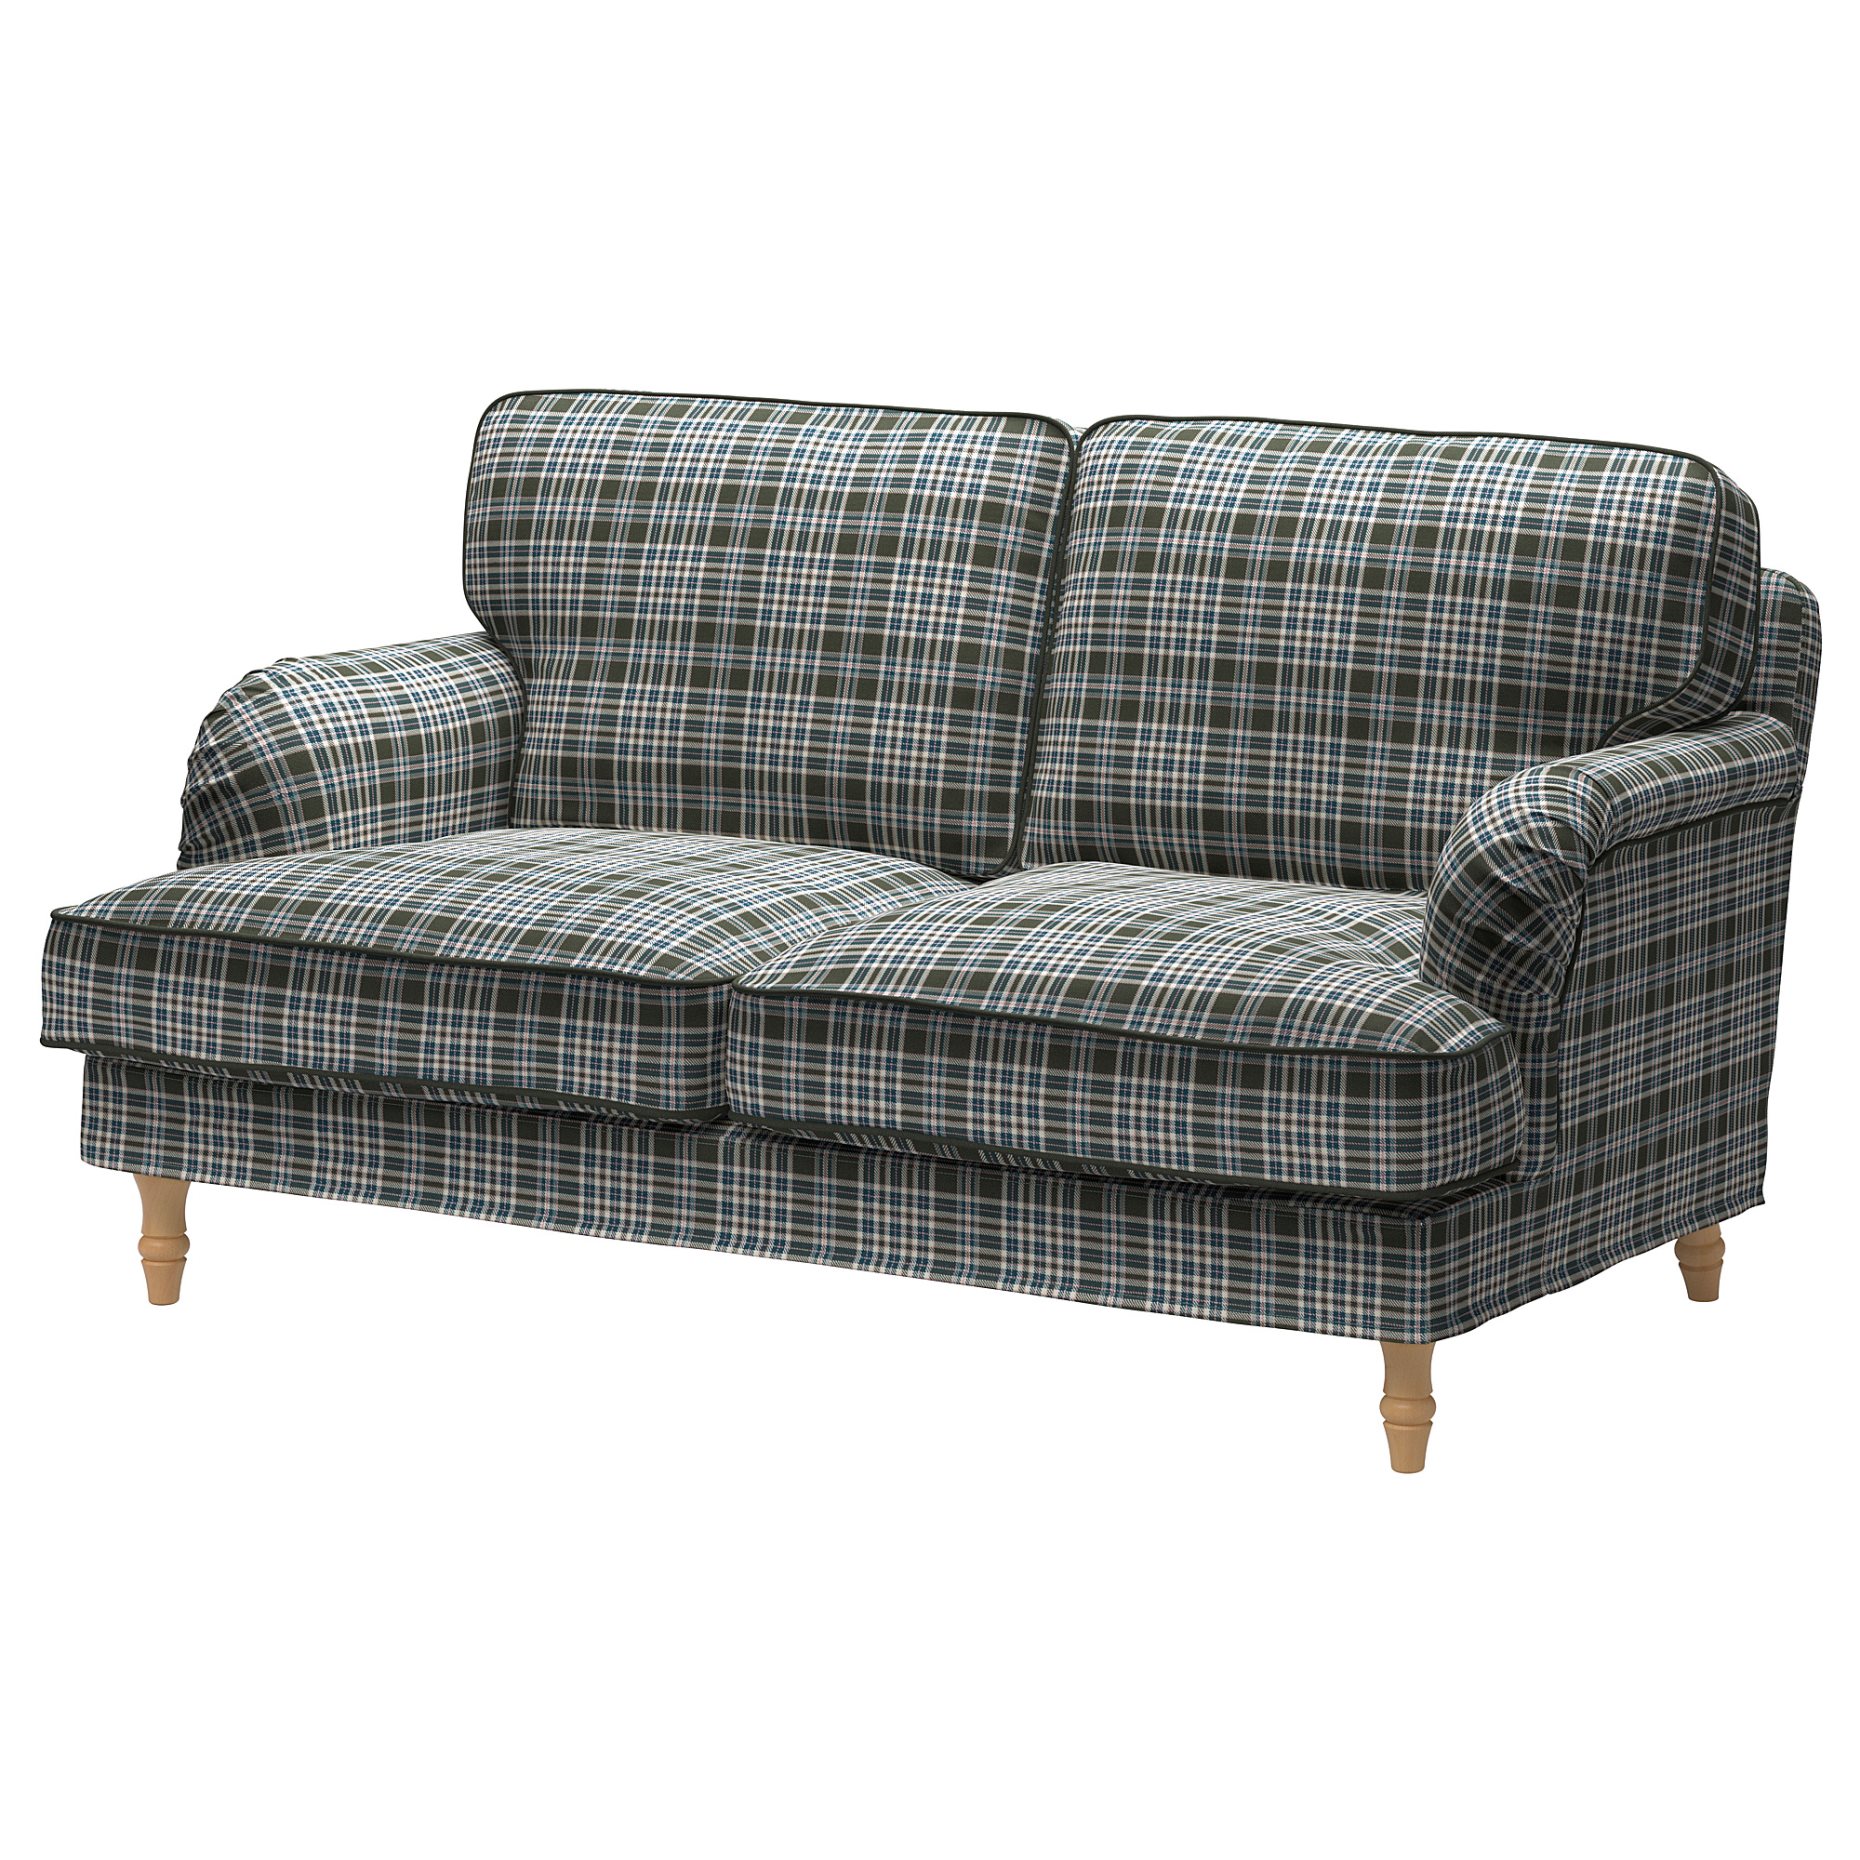 STOCKSUND, cover two-seat sofa, 804.135.39